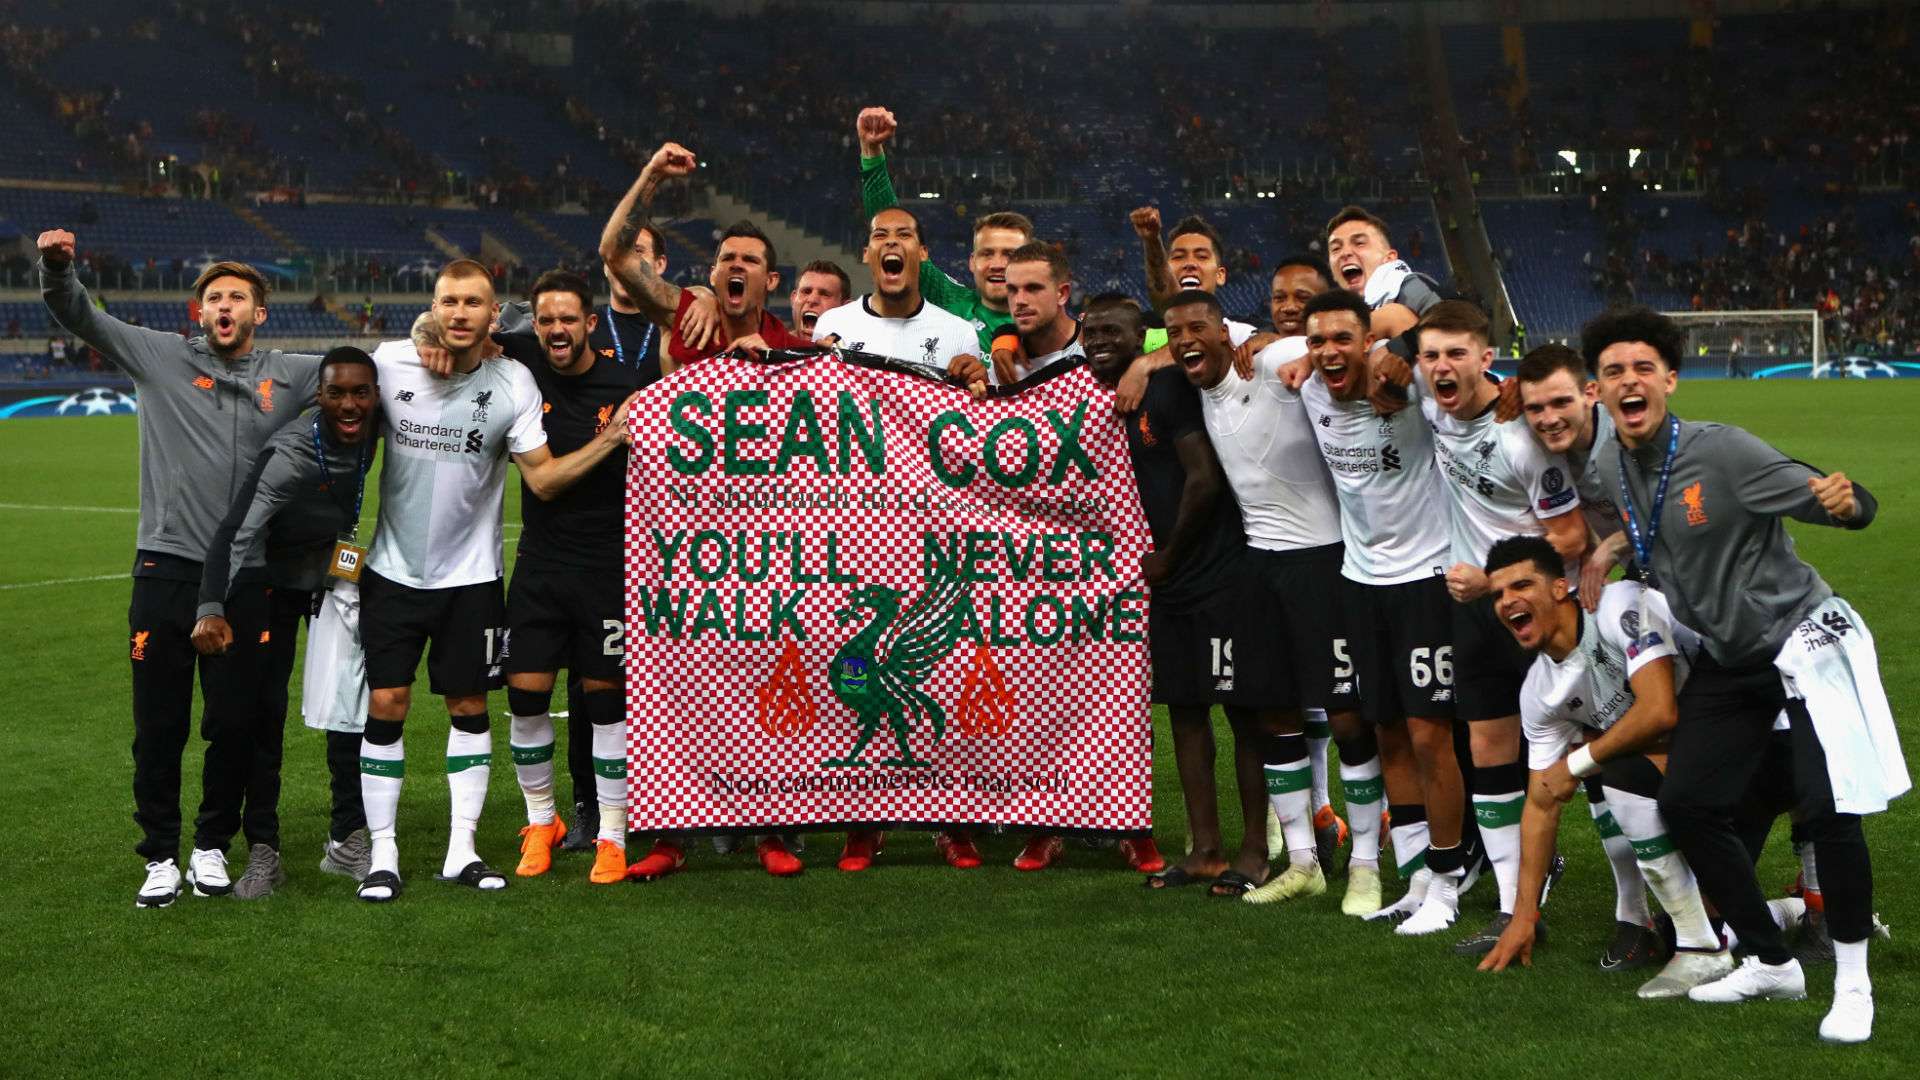 Liverpool fans hold a banner in tribute to injured fan Sean Cox